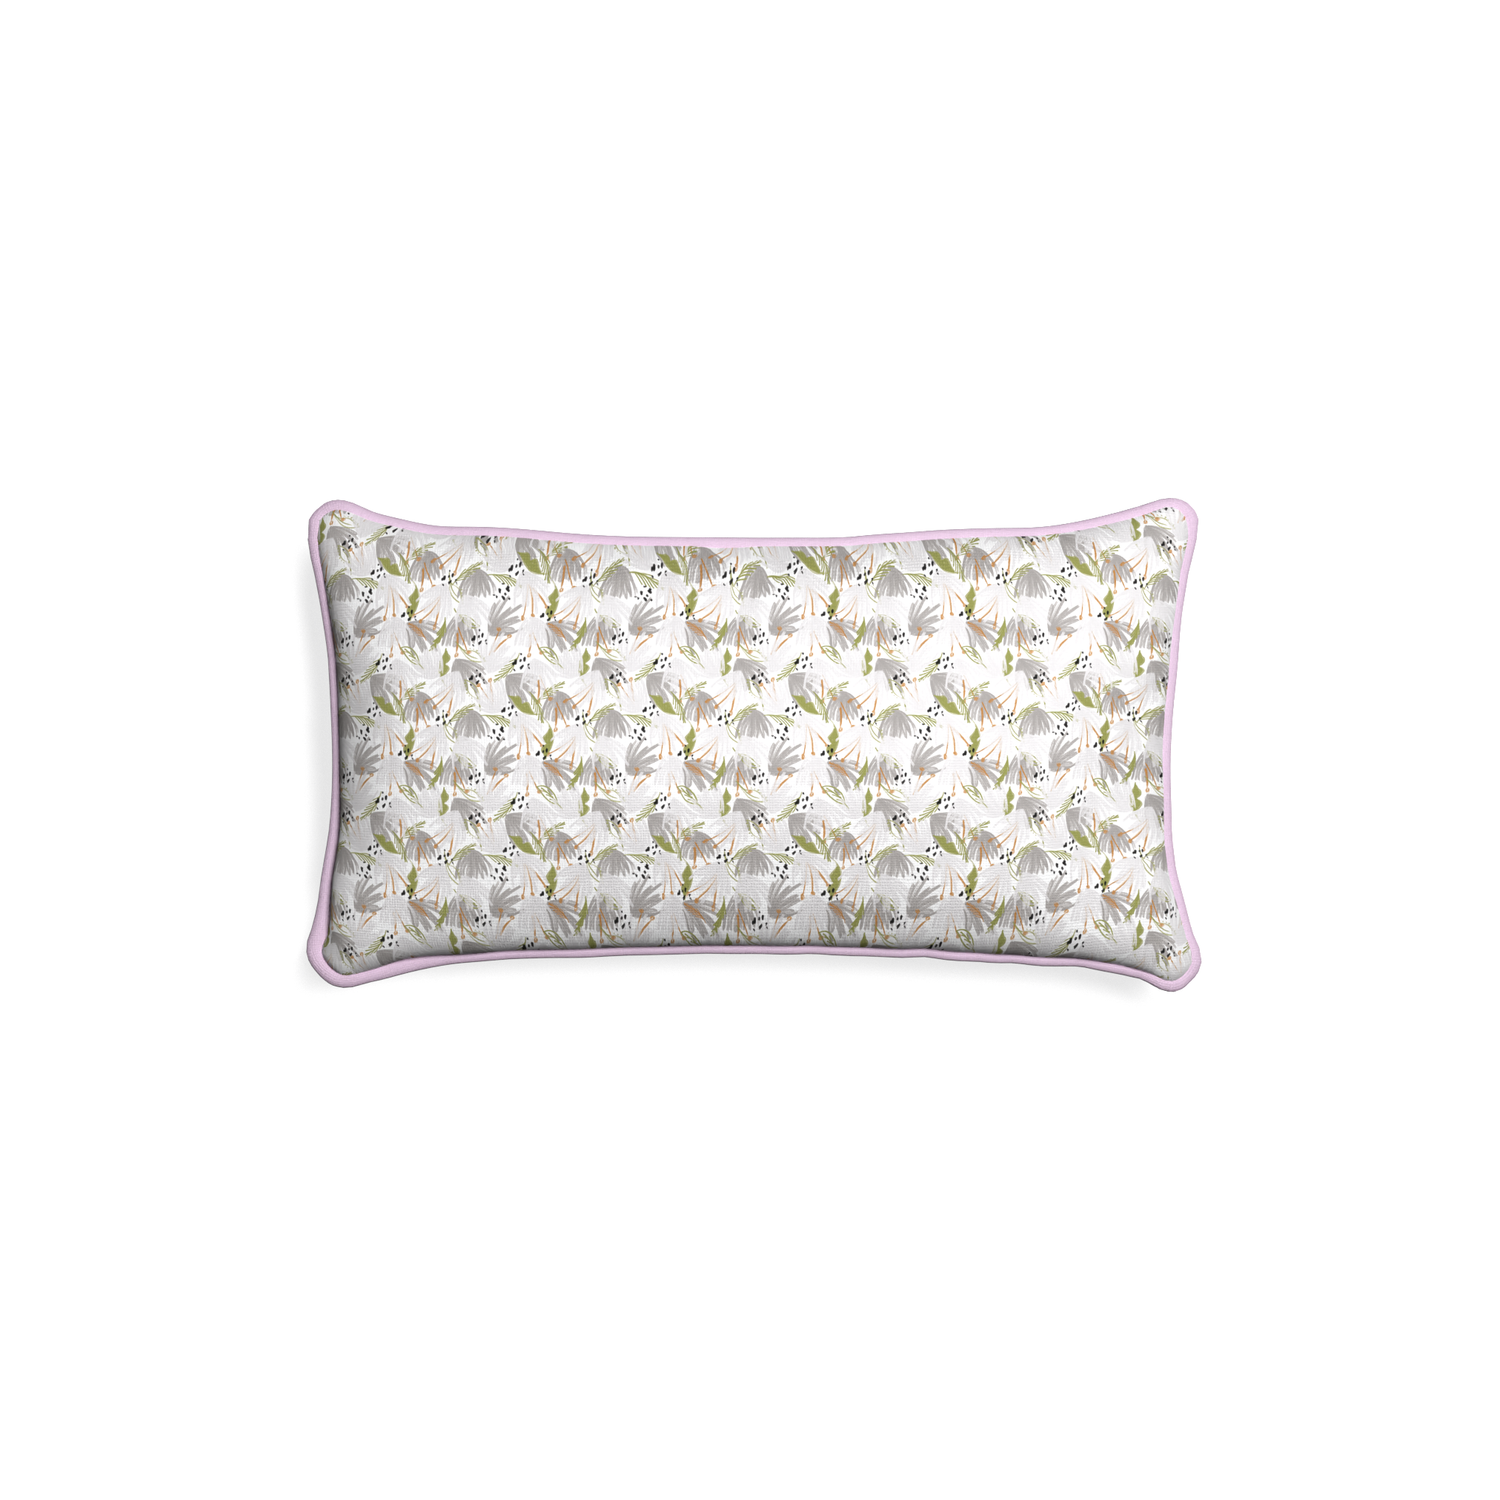 Petite-lumbar eden grey custom grey floralpillow with l piping on white background